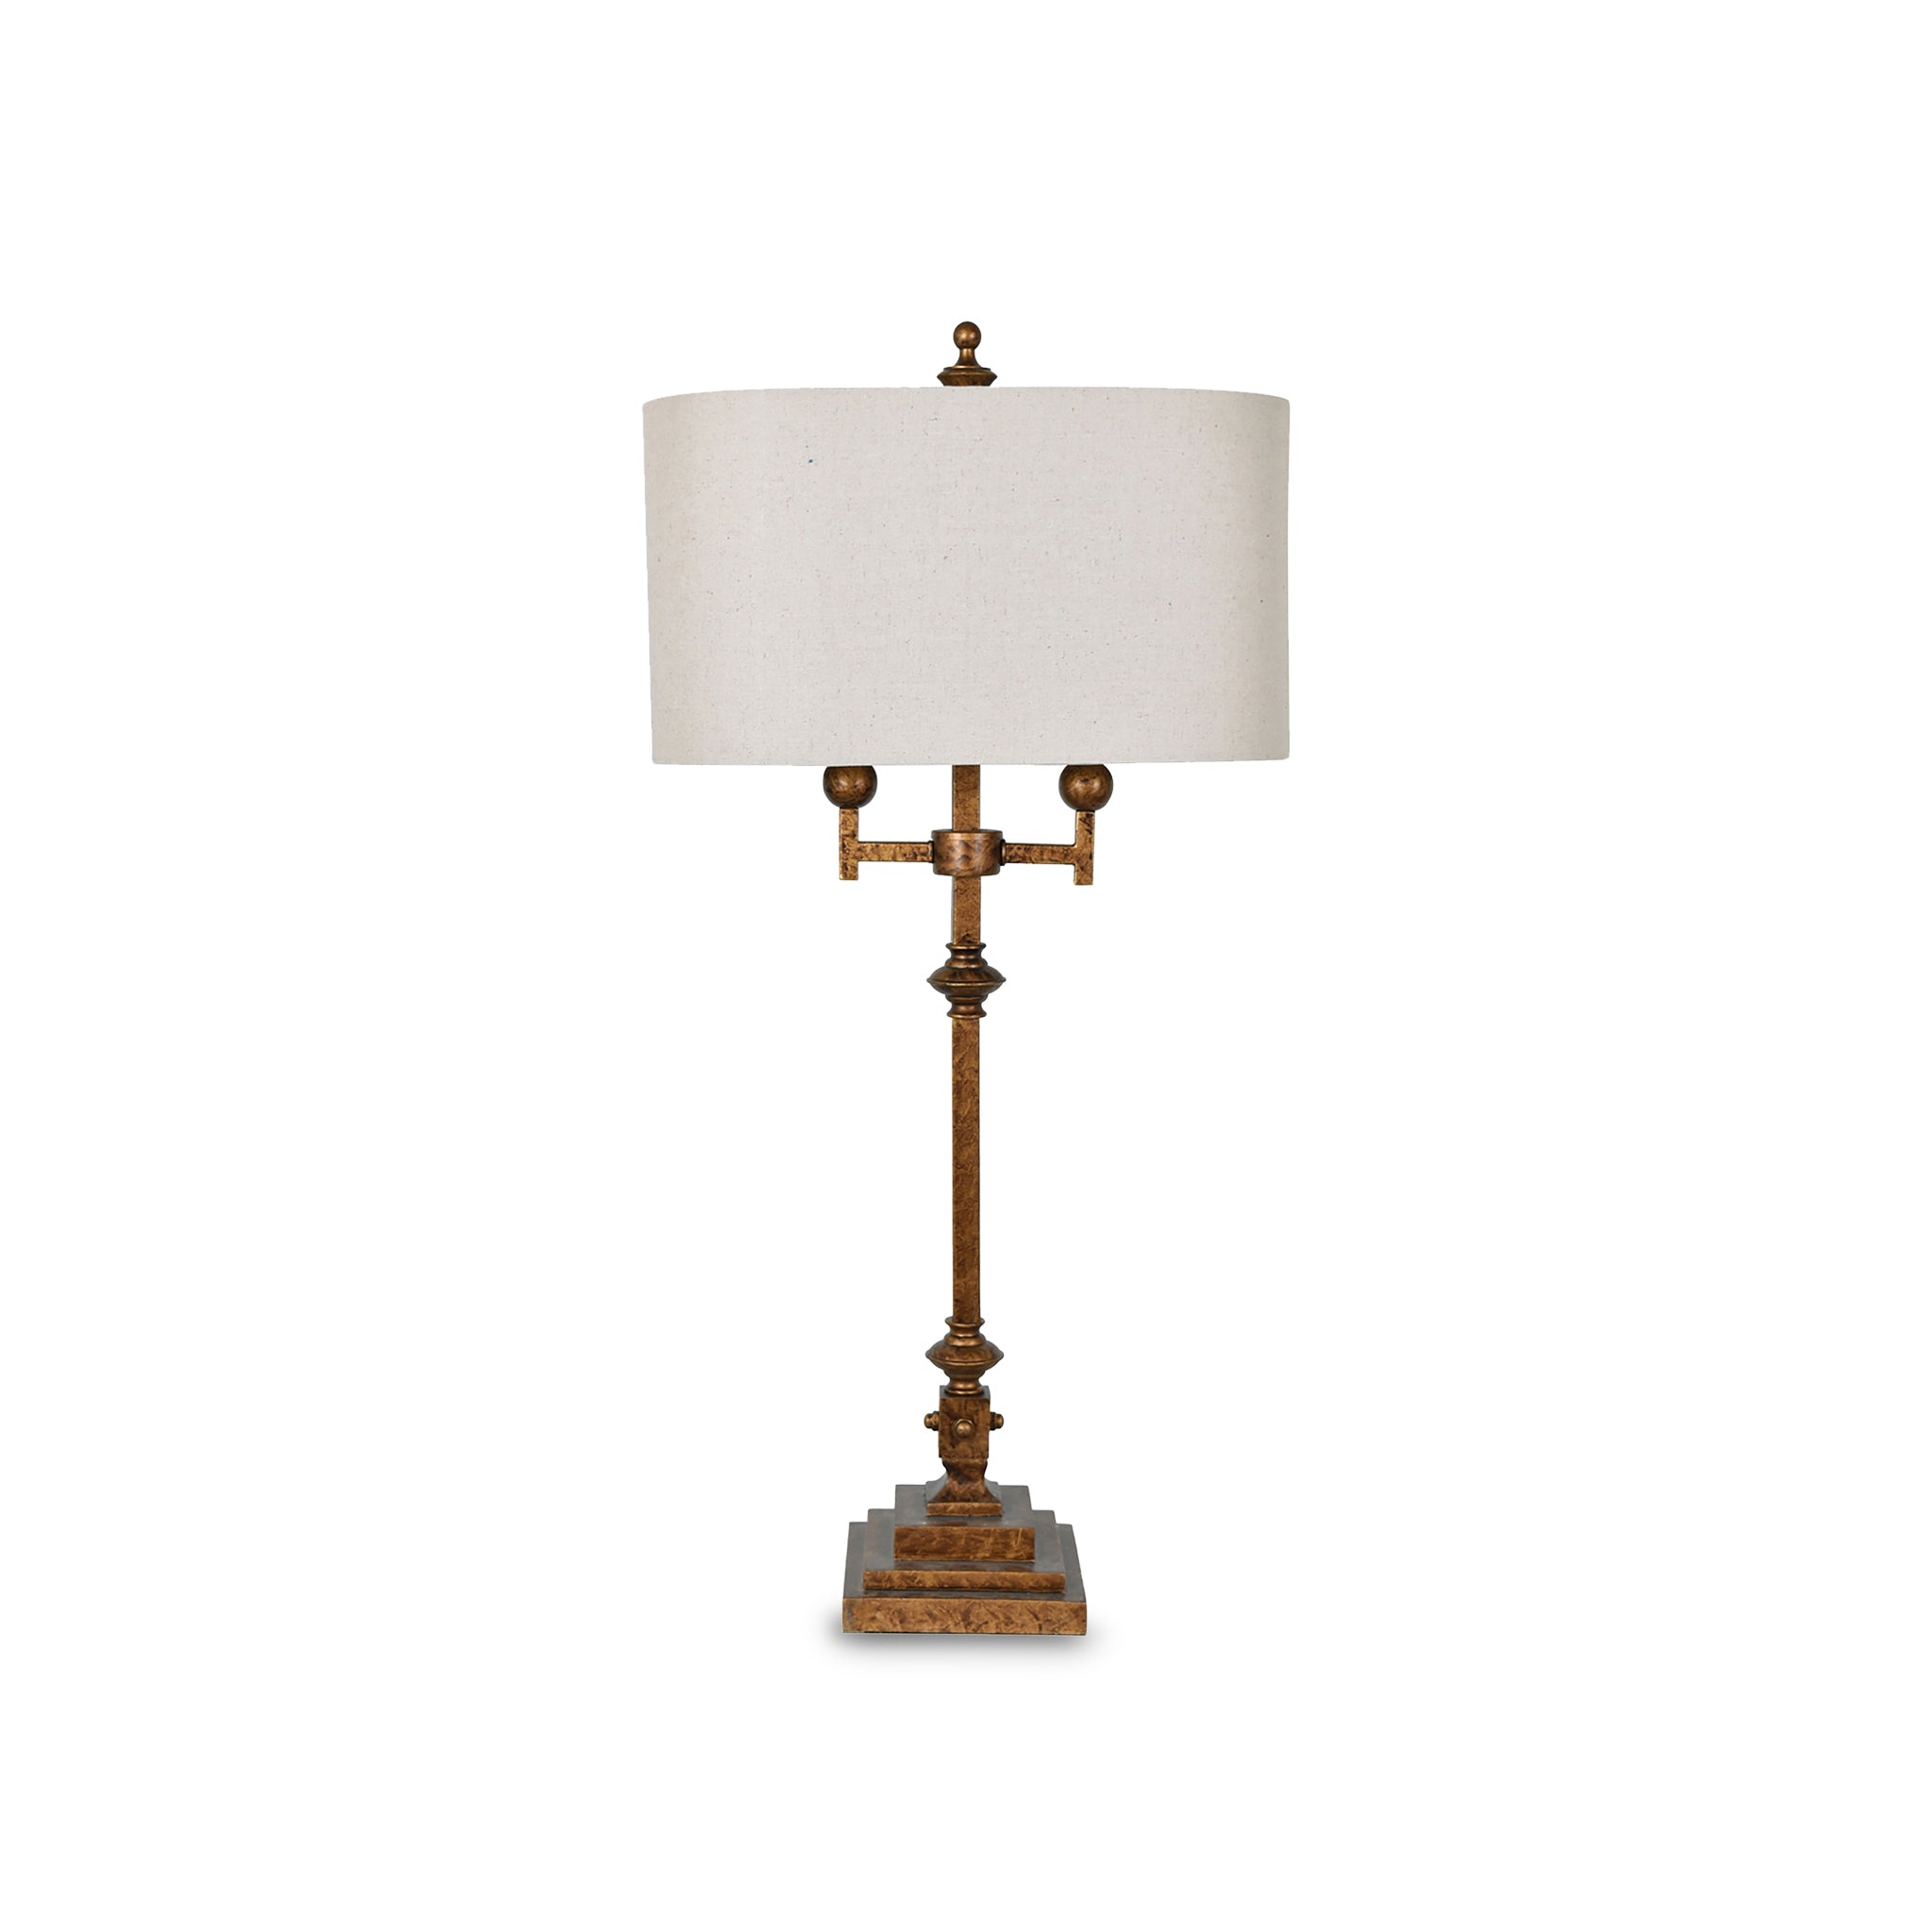 Golden Age Table Lamps - Set of 2